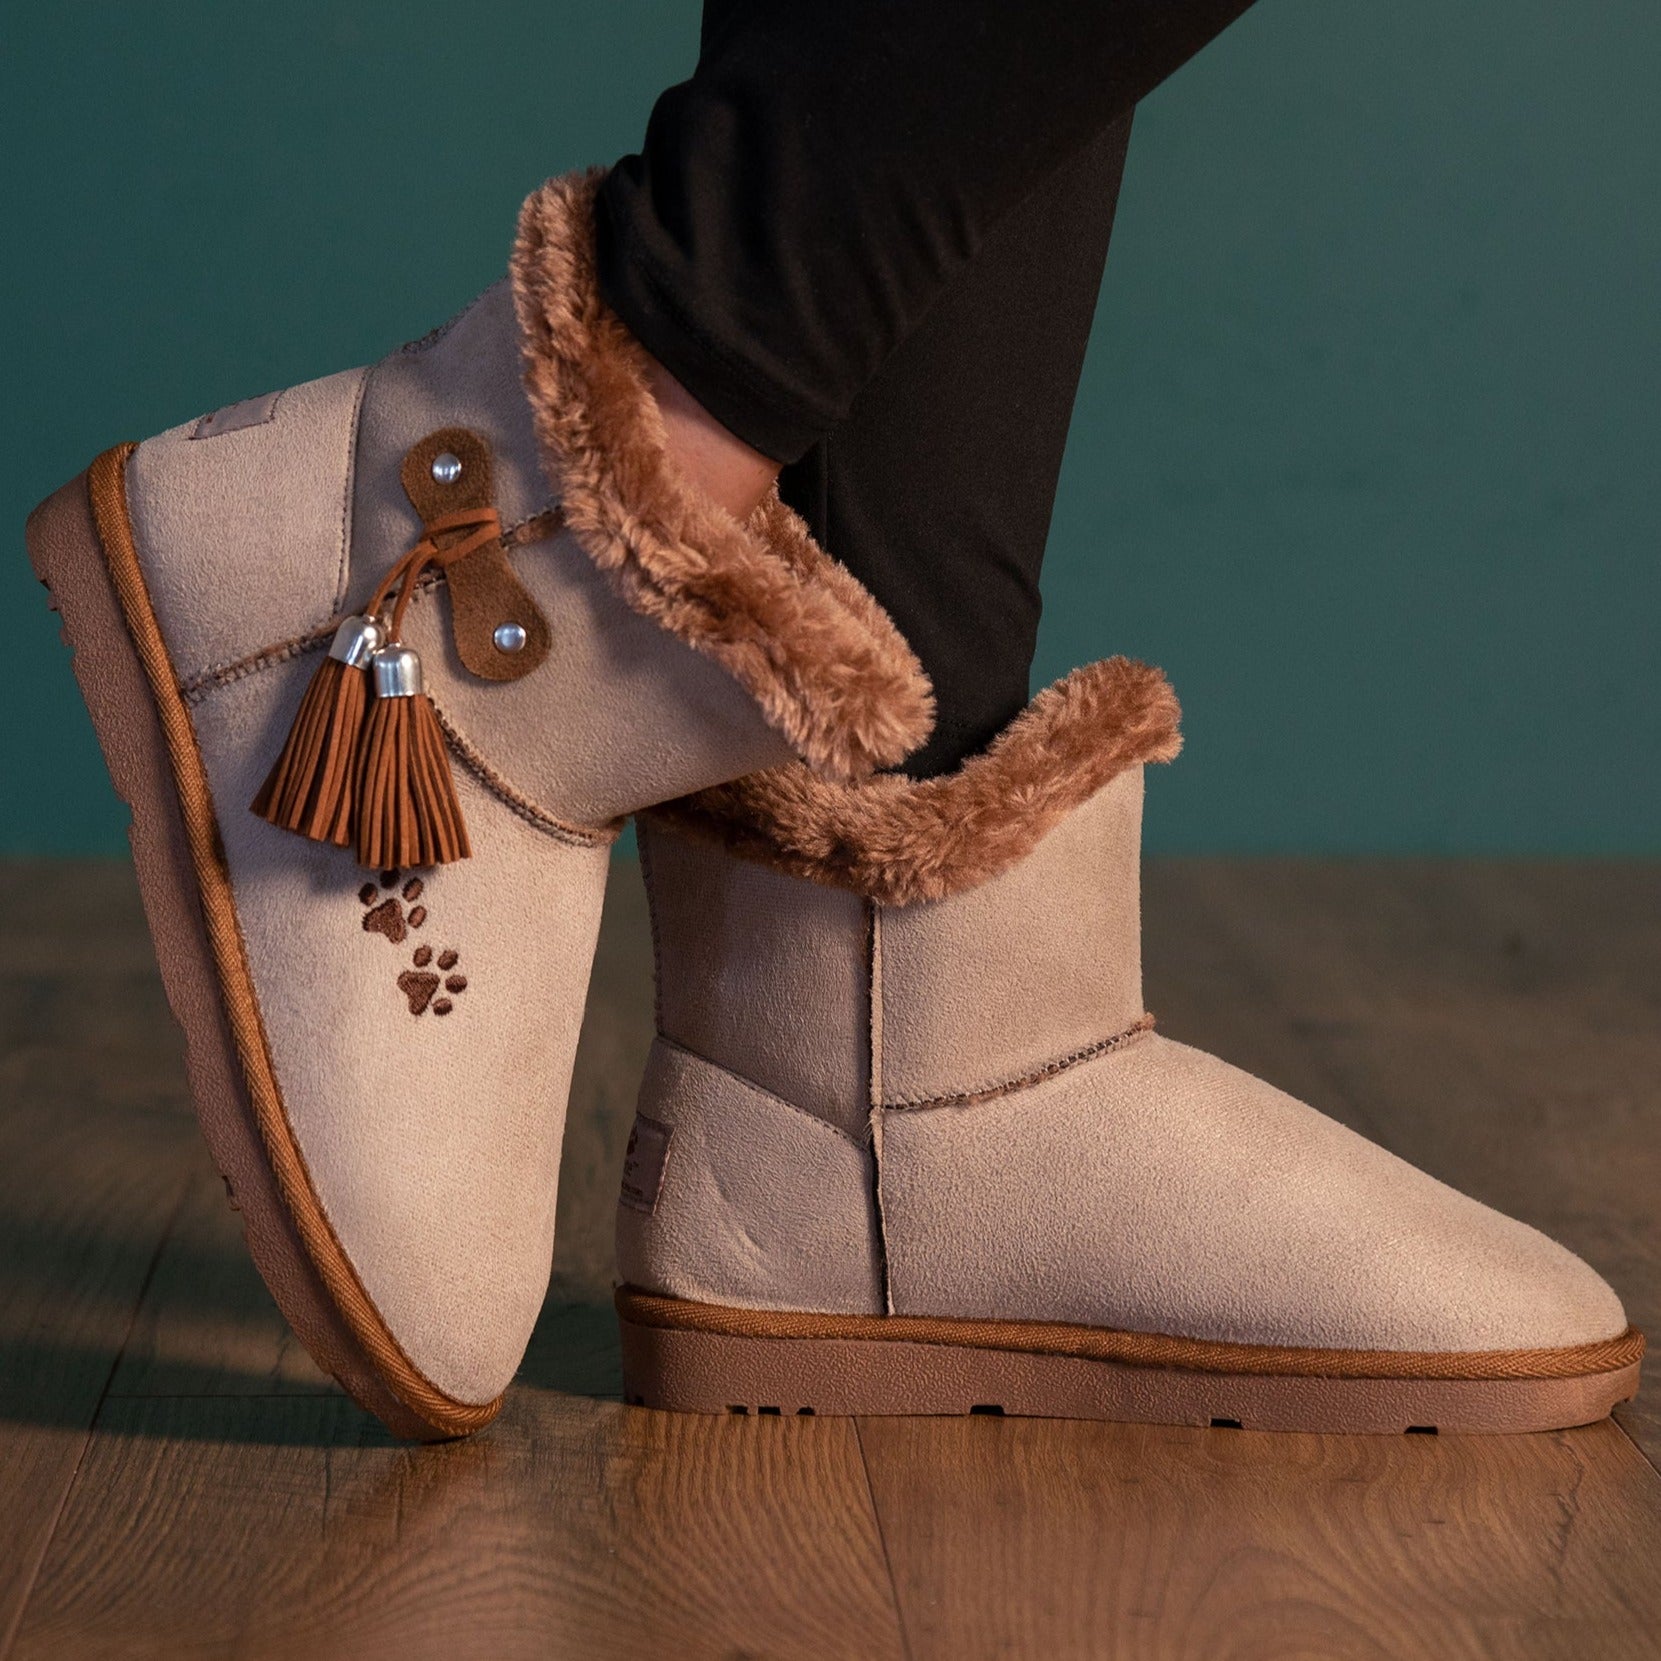 Paw Print Faux Suede Boots With Tassels - Tan - 7